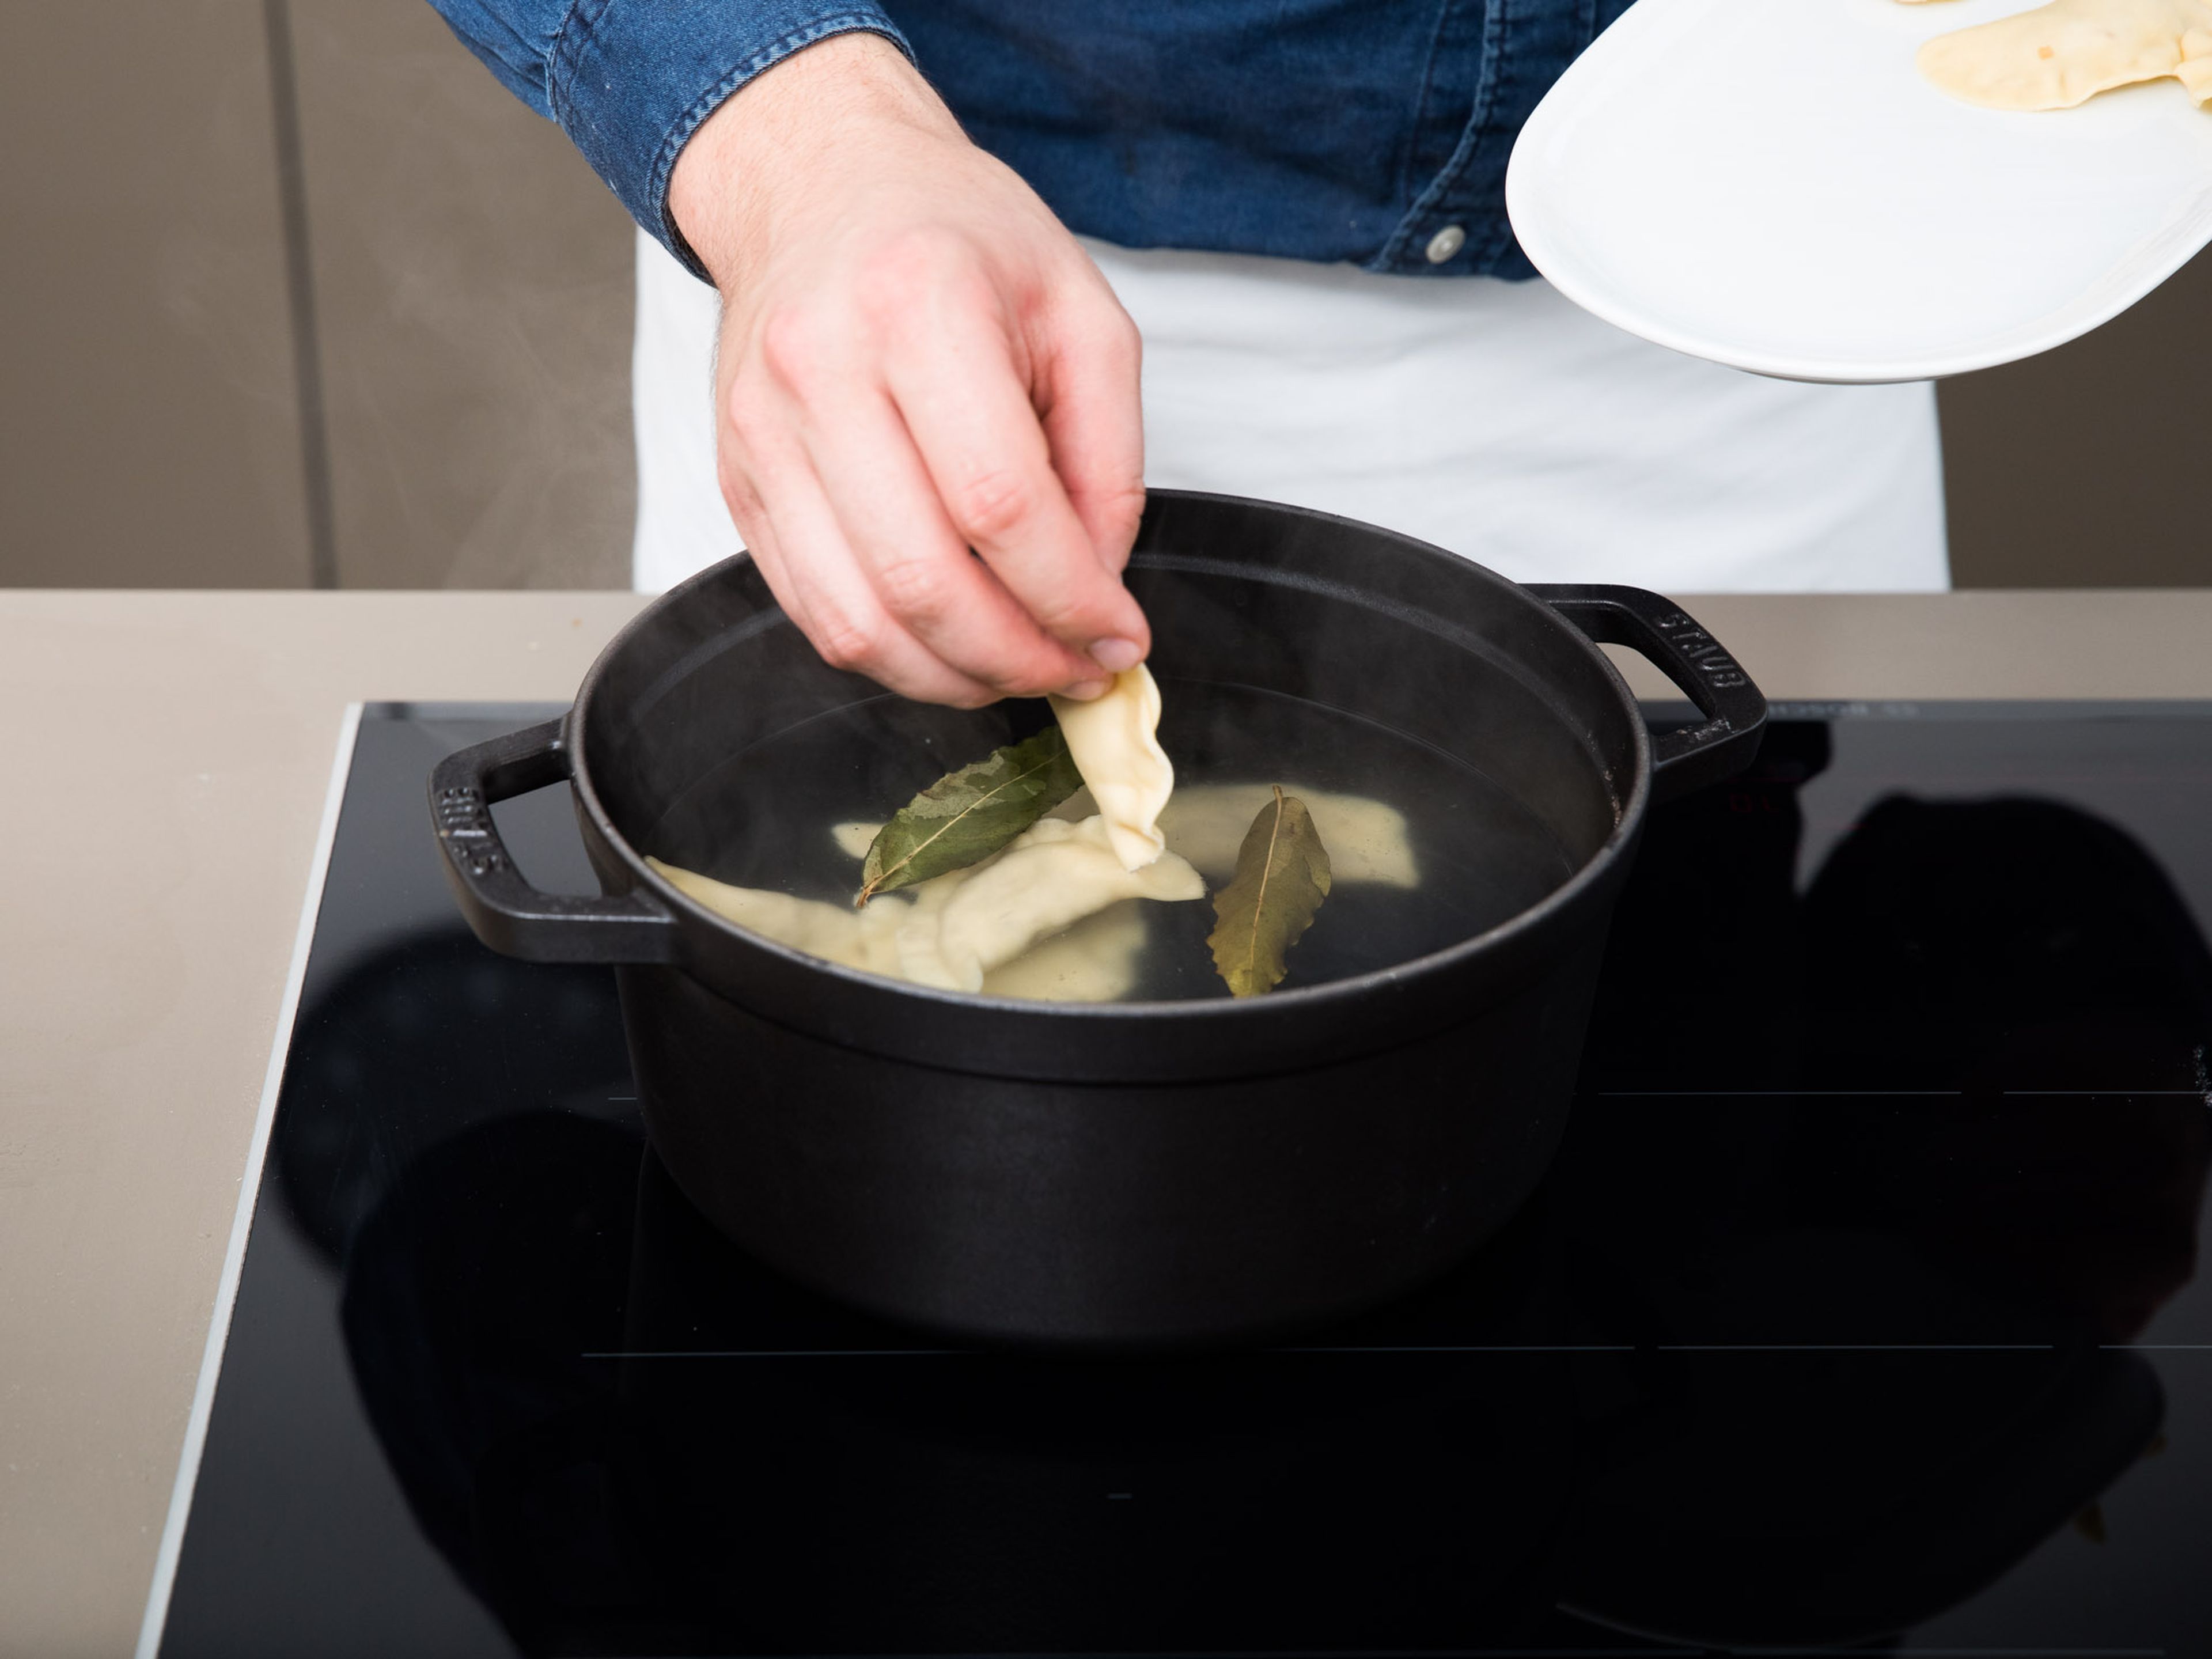 Bring salted water to a boil in a large pot, add bay leaves and carefully slip in the pierogi. Let cook at a rolling boil for approx. 3 – 4 min. Remove from the pot using a slotted spoon.